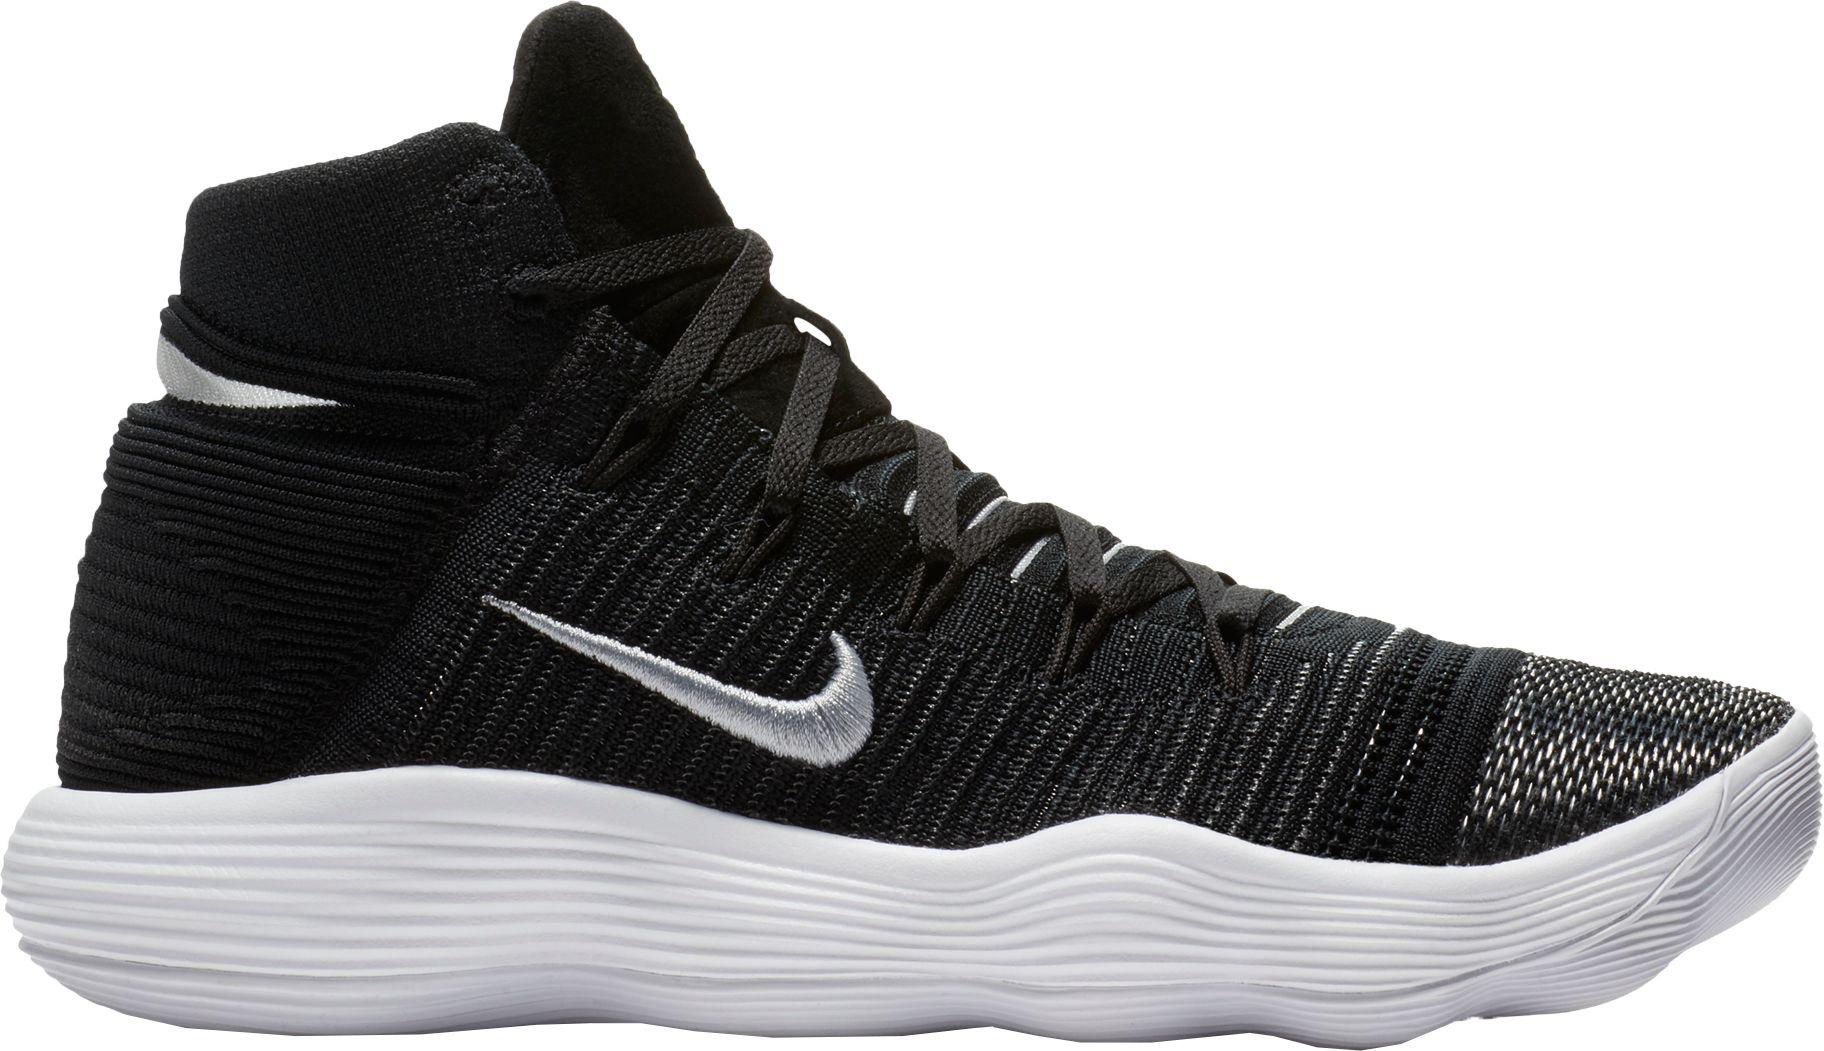 flyknit basketball shoes